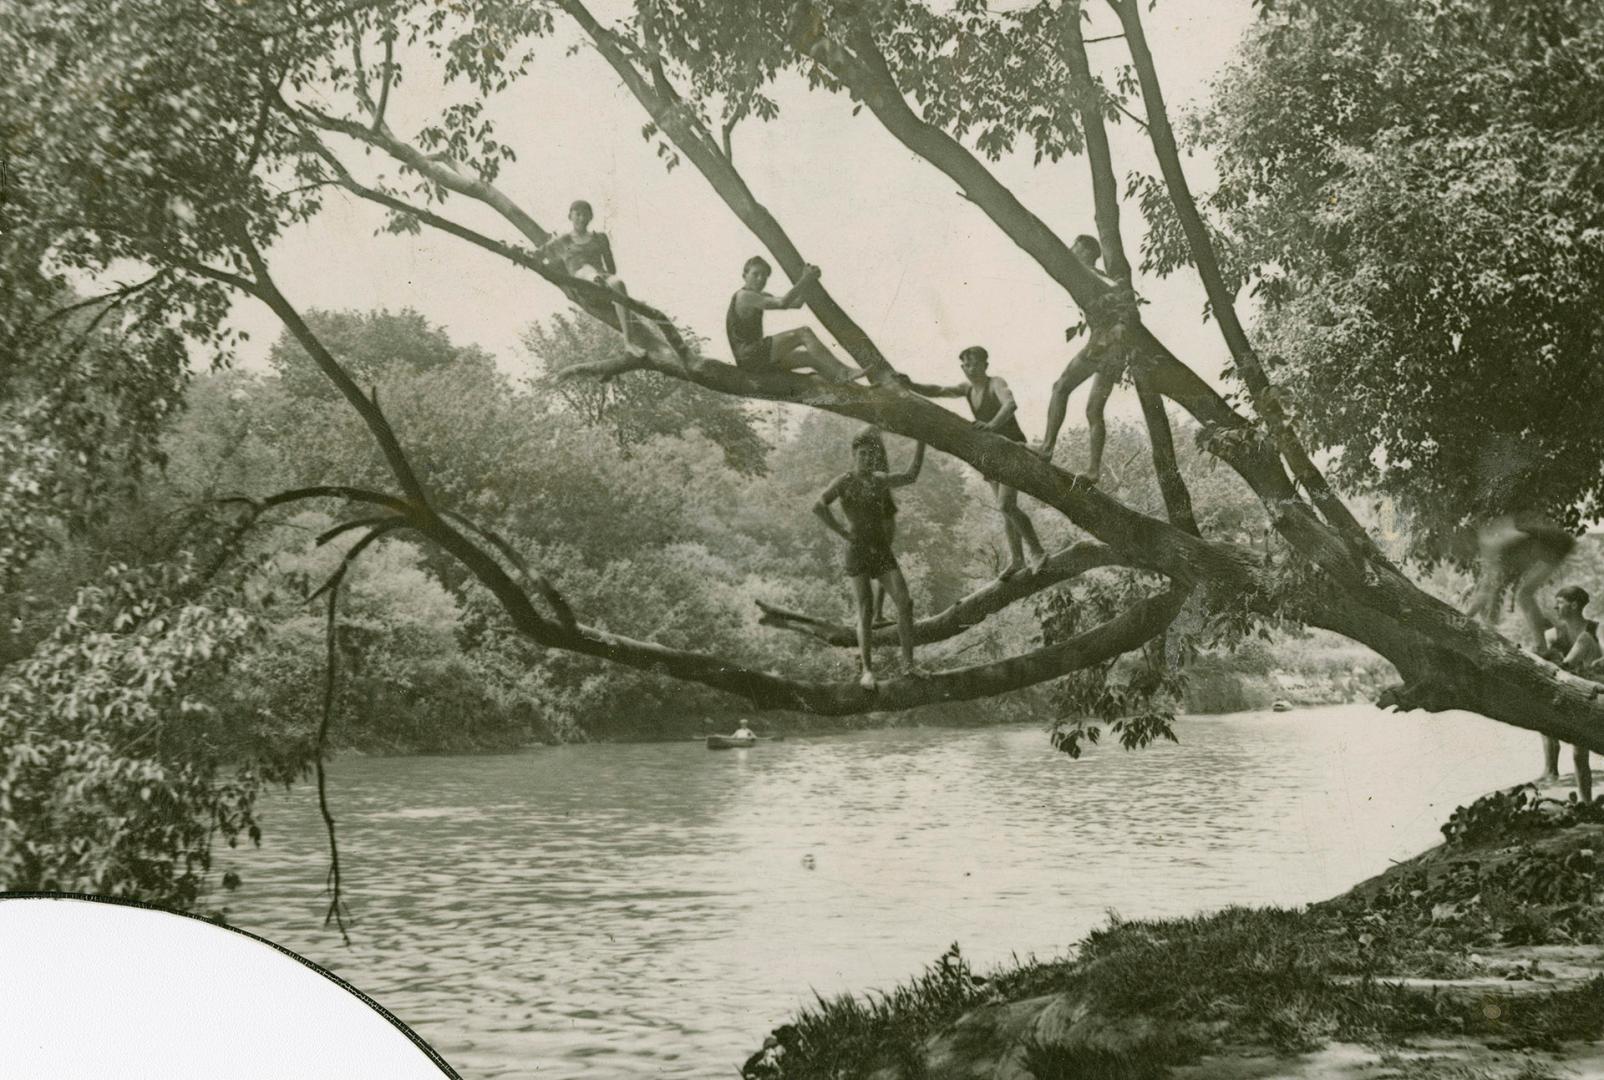 Boys climbing tree over the Humber River